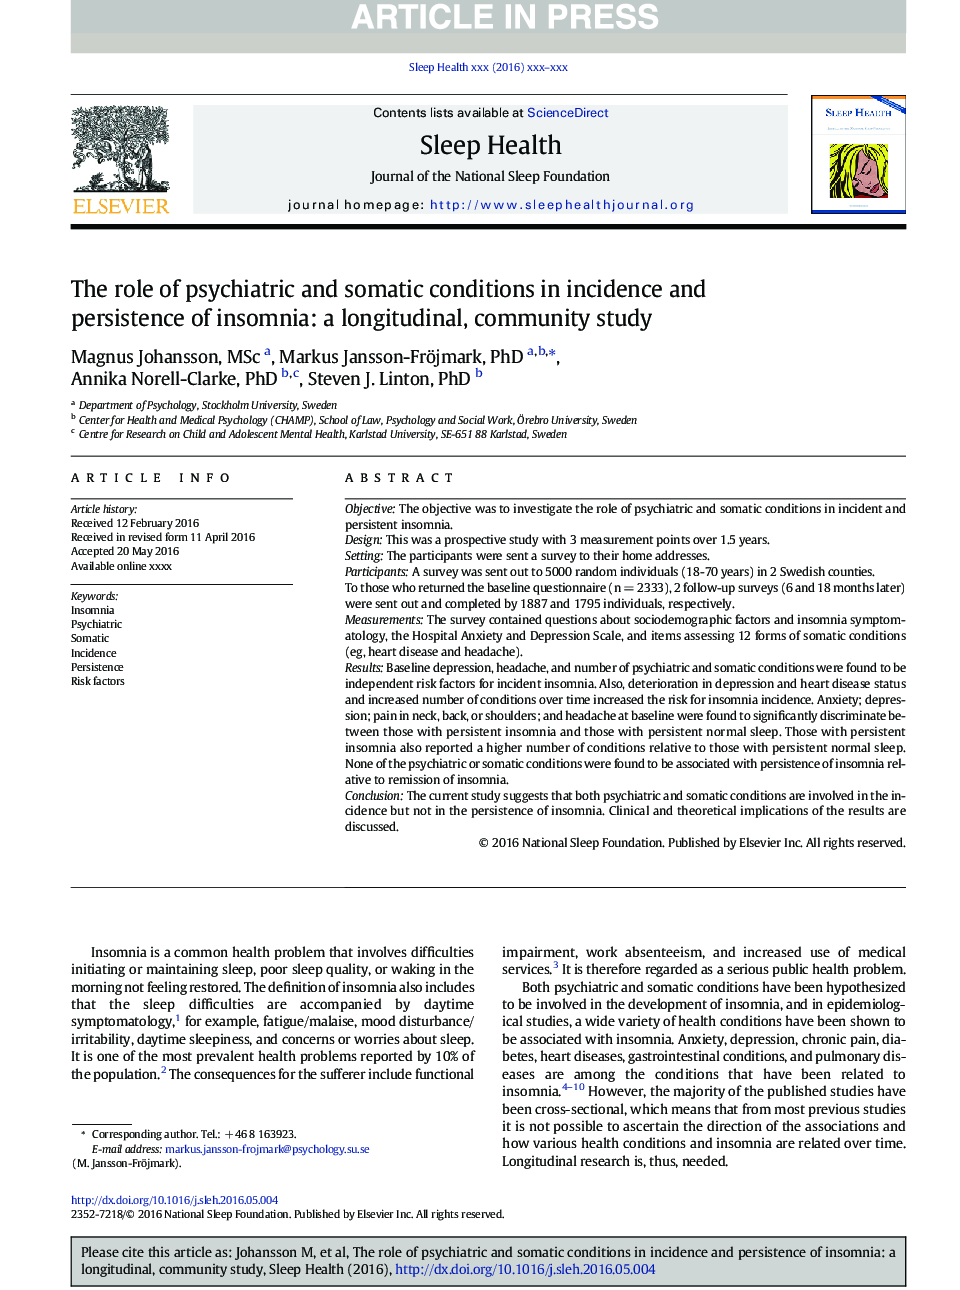 The role of psychiatric and somatic conditions in incidence and persistence of insomnia: a longitudinal, community study